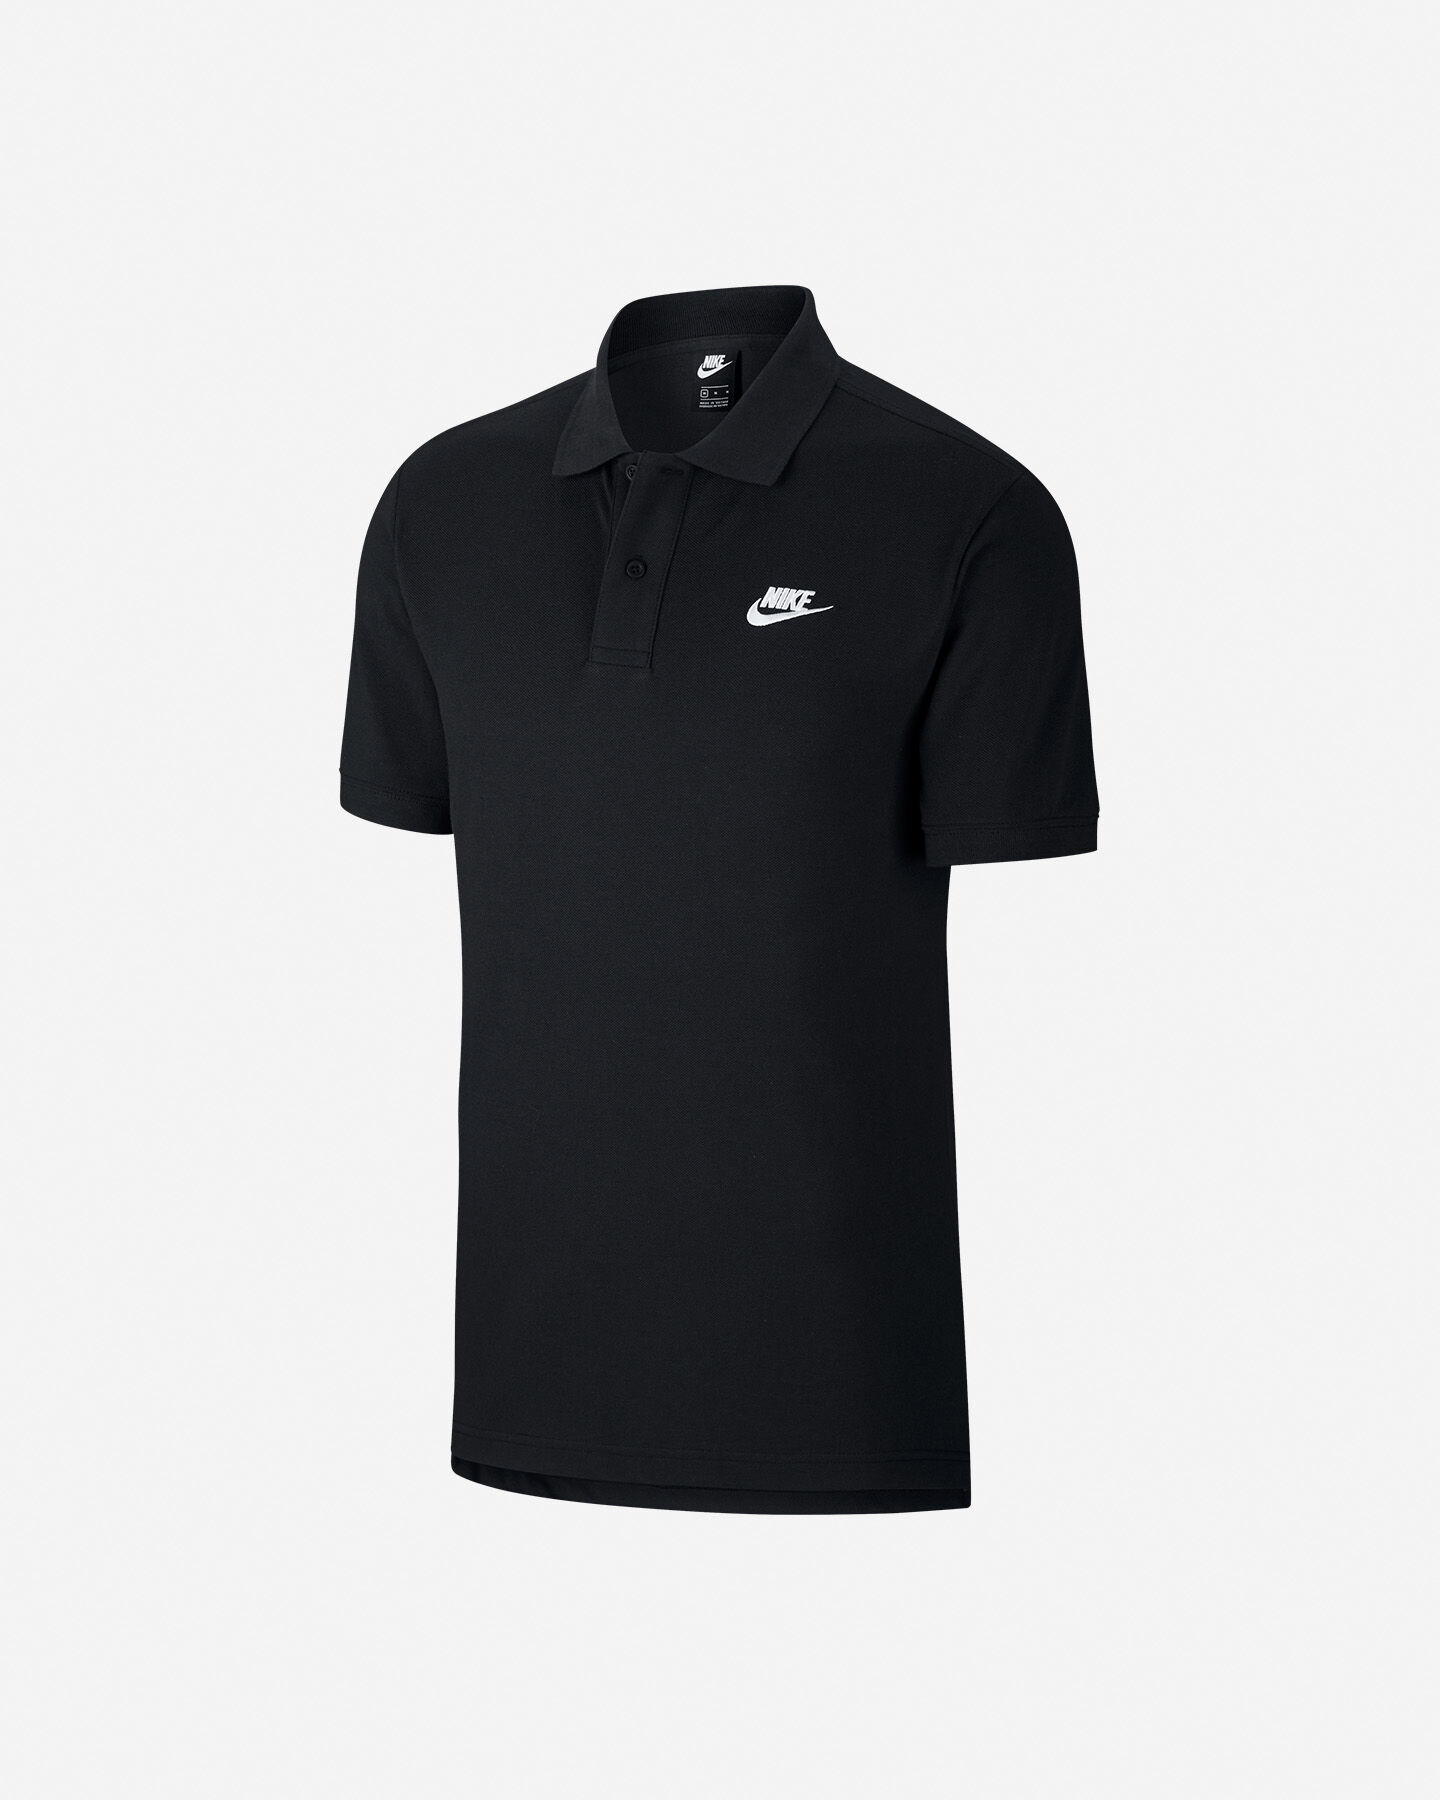  T-Shirt NIKE MATCHUP M S5164260 scatto 0